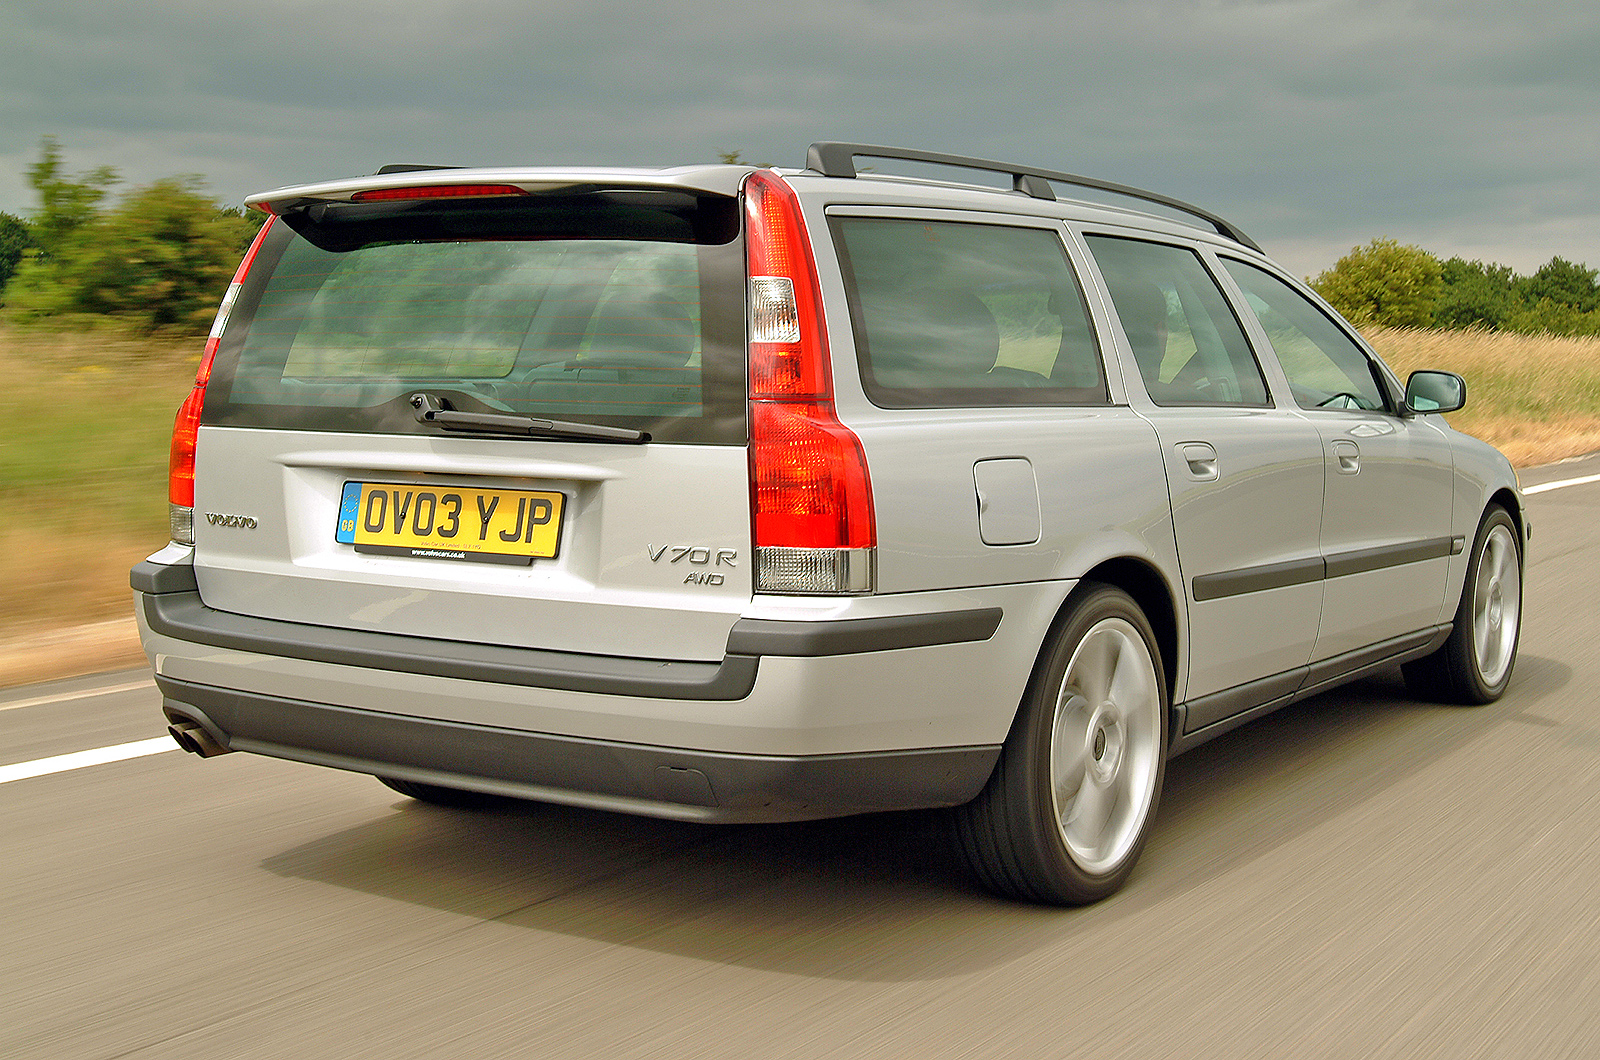 Great 150mph used cars for under £20,000